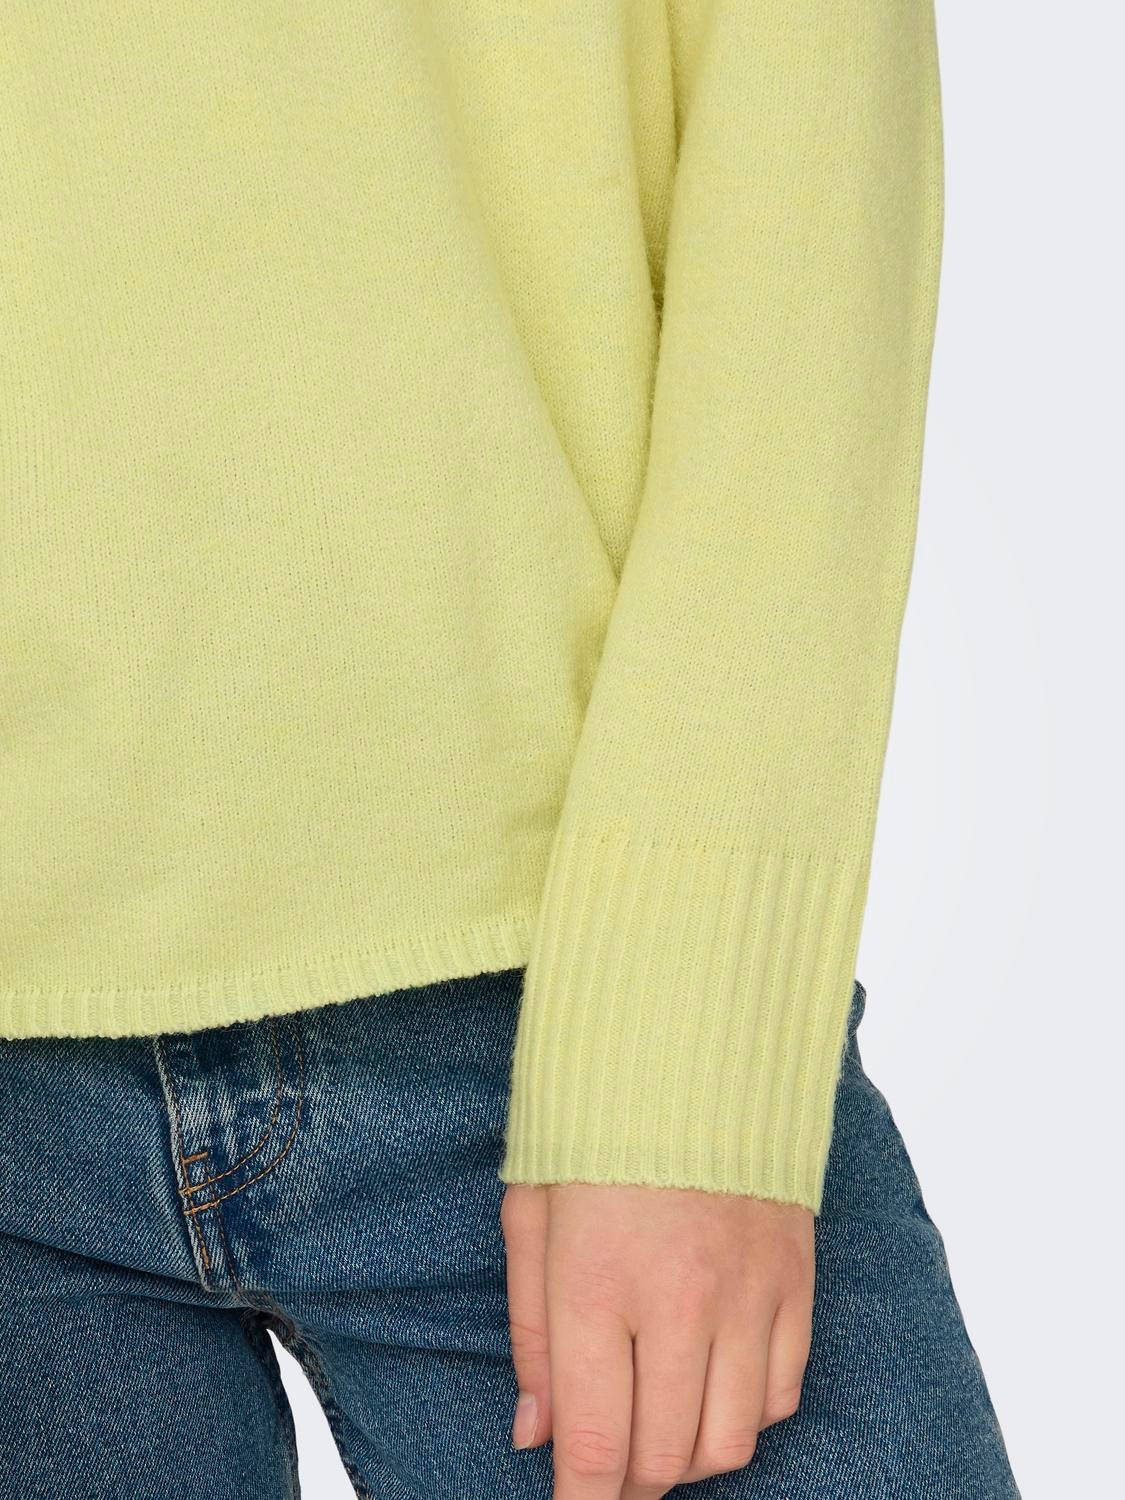 ONLY V-neck Knitted Pullover -Yellow Pear - 15224360